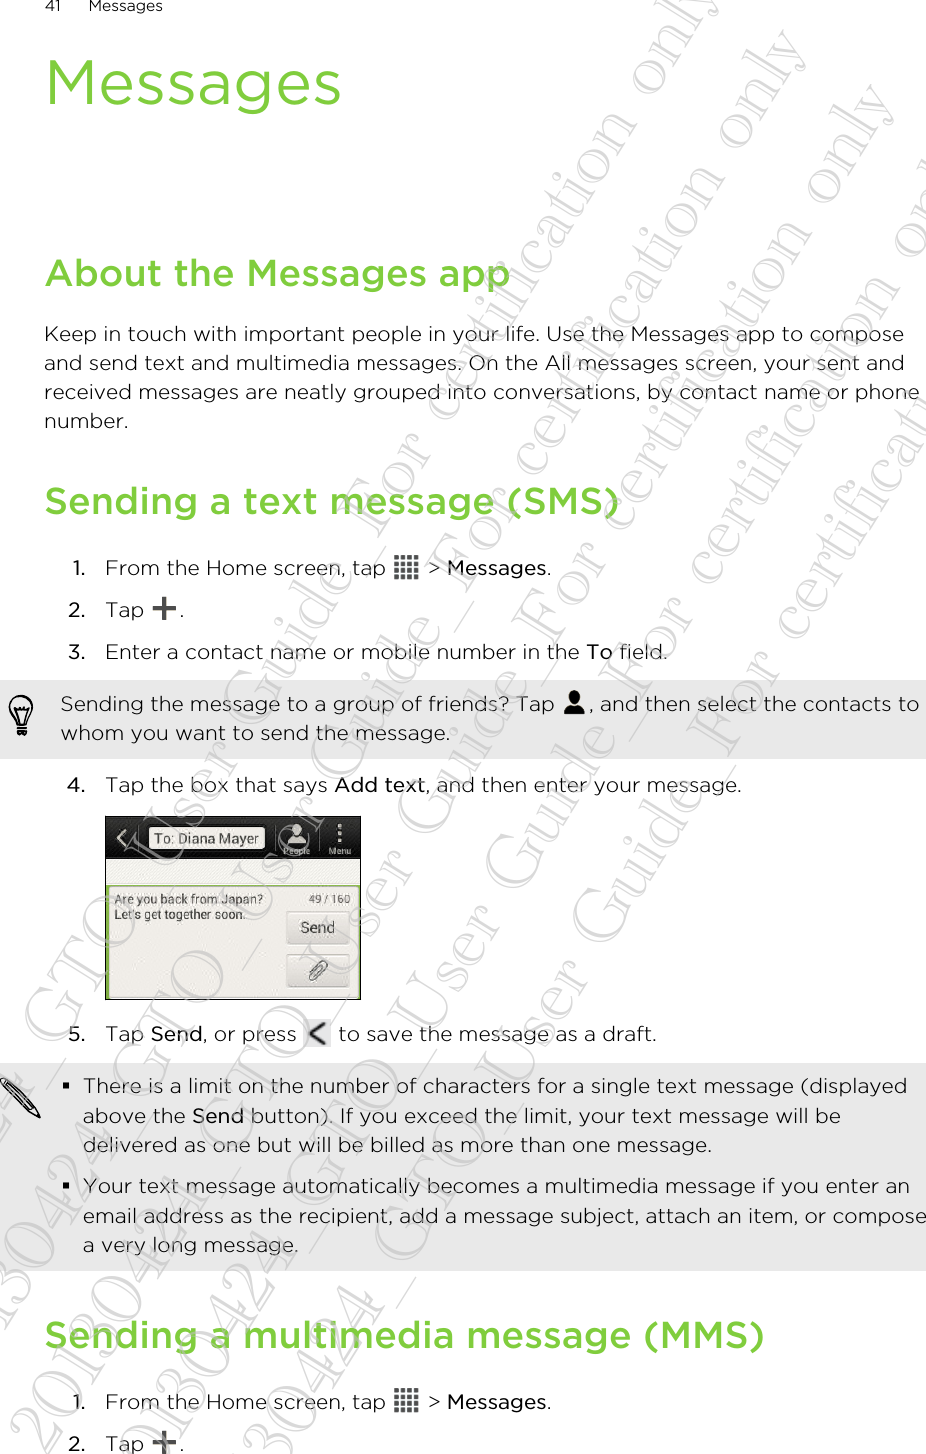 MessagesAbout the Messages appKeep in touch with important people in your life. Use the Messages app to composeand send text and multimedia messages. On the All messages screen, your sent andreceived messages are neatly grouped into conversations, by contact name or phonenumber.Sending a text message (SMS)1. From the Home screen, tap   &gt; Messages.2. Tap  .3. Enter a contact name or mobile number in the To field. Sending the message to a group of friends? Tap  , and then select the contacts towhom you want to send the message.4. Tap the box that says Add text, and then enter your message. 5. Tap Send, or press   to save the message as a draft. §There is a limit on the number of characters for a single text message (displayedabove the Send button). If you exceed the limit, your text message will bedelivered as one but will be billed as more than one message.§Your text message automatically becomes a multimedia message if you enter anemail address as the recipient, add a message subject, attach an item, or composea very long message.Sending a multimedia message (MMS)1. From the Home screen, tap   &gt; Messages.2. Tap  .41 Messages20130424_GTO_User Guide_For certification only 20130424_GTO_User Guide_For certification only 20130424_GTO_User Guide_For certification only 20130424_GTO_User Guide_For certification only 20130424_GTO_User Guide_For certification only